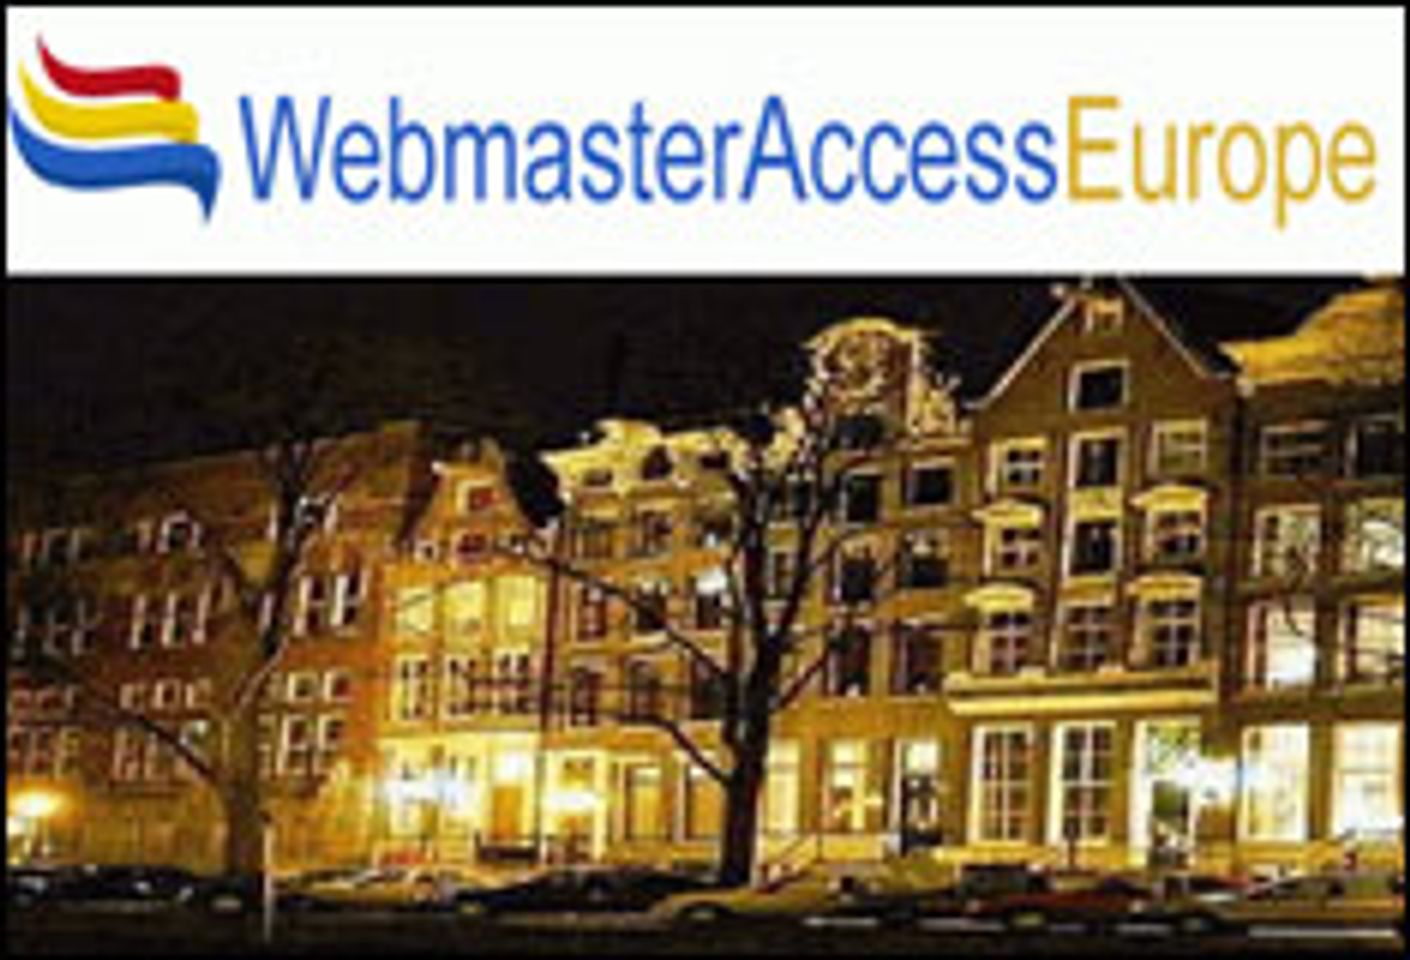 Amsterdam the Next Mecca for Webmaster Access?